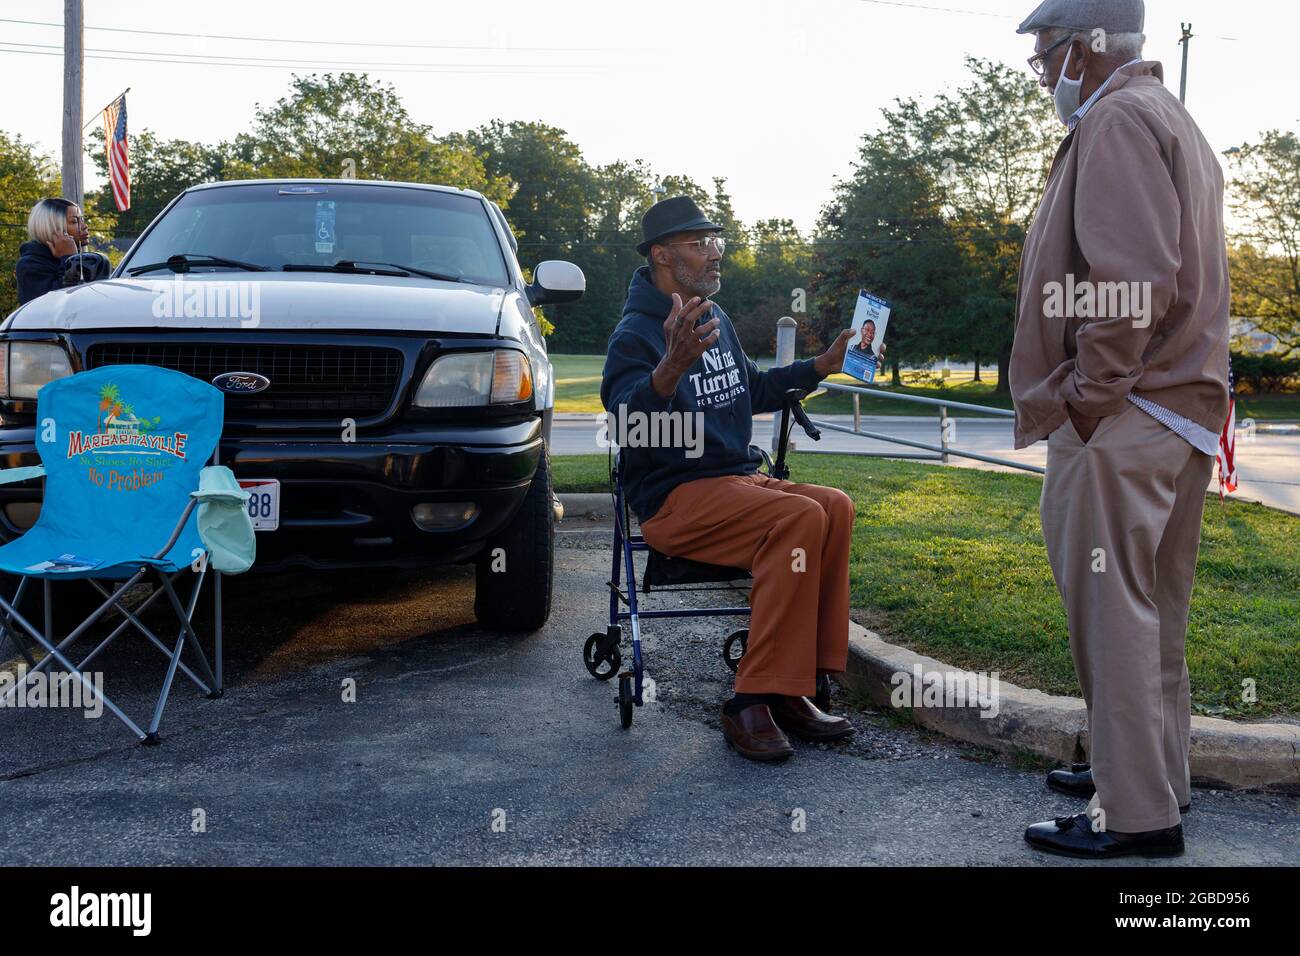 Erwin Johnson, 61, of Cleveland, Ohio talks to a voter outside of the polling place at Warrensville Heights Recreation Center. Johnson came to show support for Nina Turner because, “I think she's the best candidate. She's been a state rep, She's the most qualified.” Voters came out to the polls for a special election in Ohio's 11th district. The two main leading candidates for this House of Representatives seat are two Democrats, Nina Turner, a progressive candidate, and Shontel Brown, who represents the traditional Democratic establishment. Stock Photo